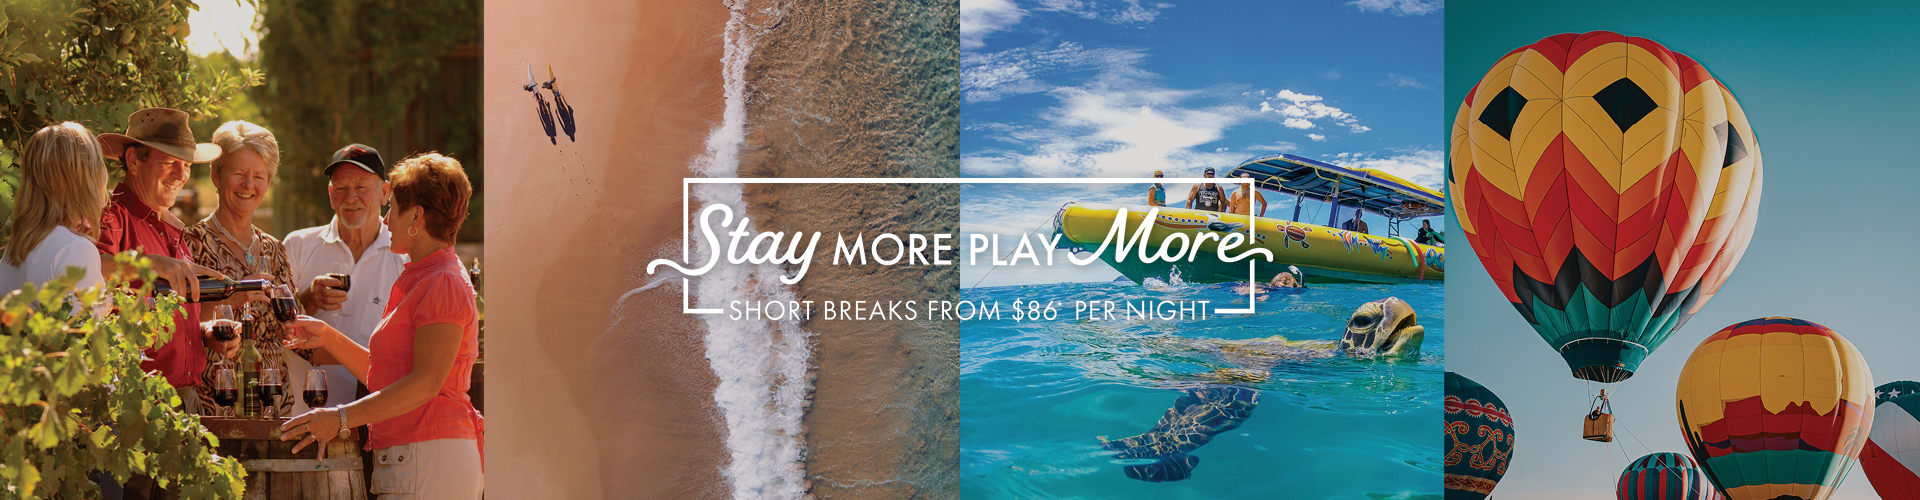 Stay more play more with oaks hotels in queensland and new south wales banner